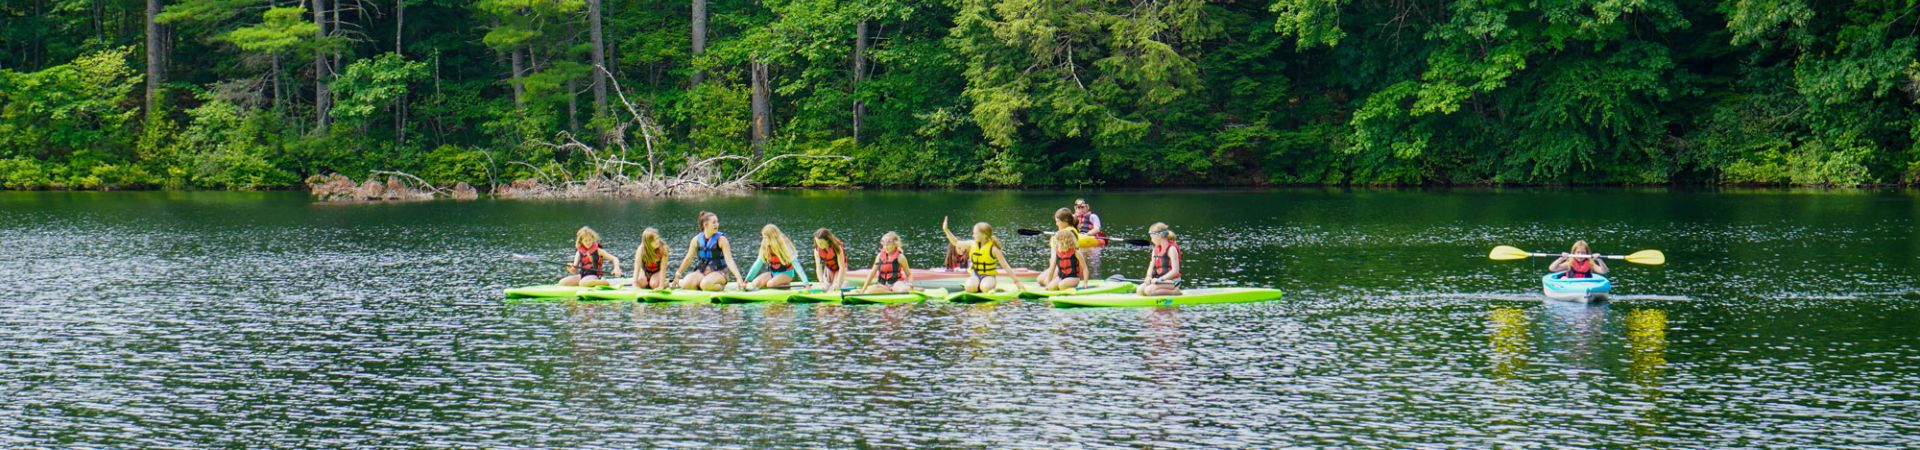  group of girl scouts on paddleboards in the water 